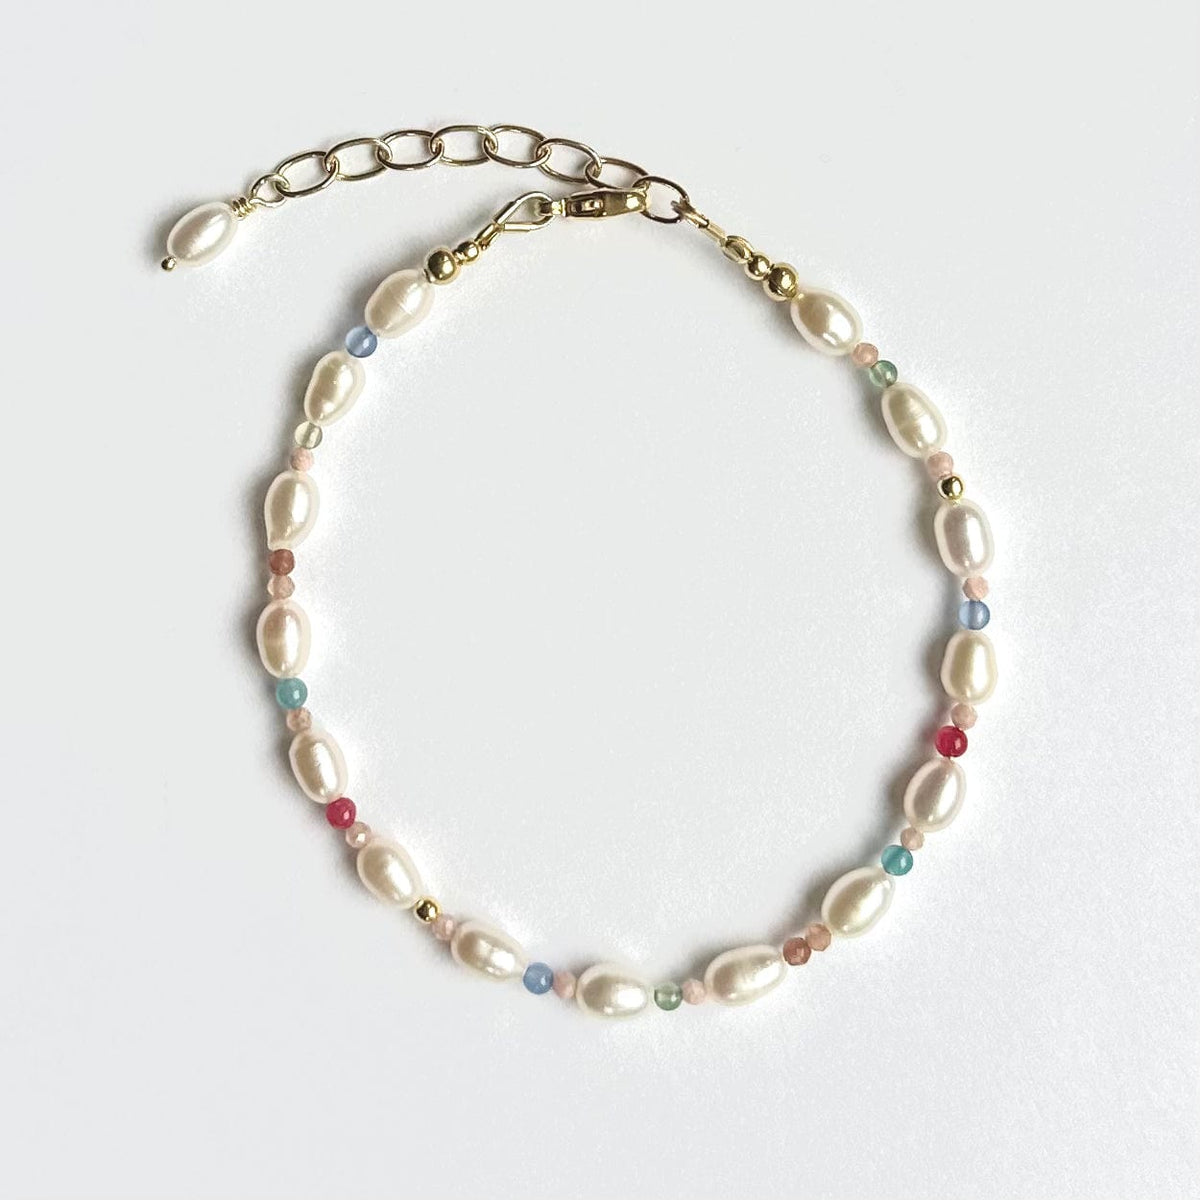 Delicate Pearl and Coloured Gemstone Beaded Bracelet